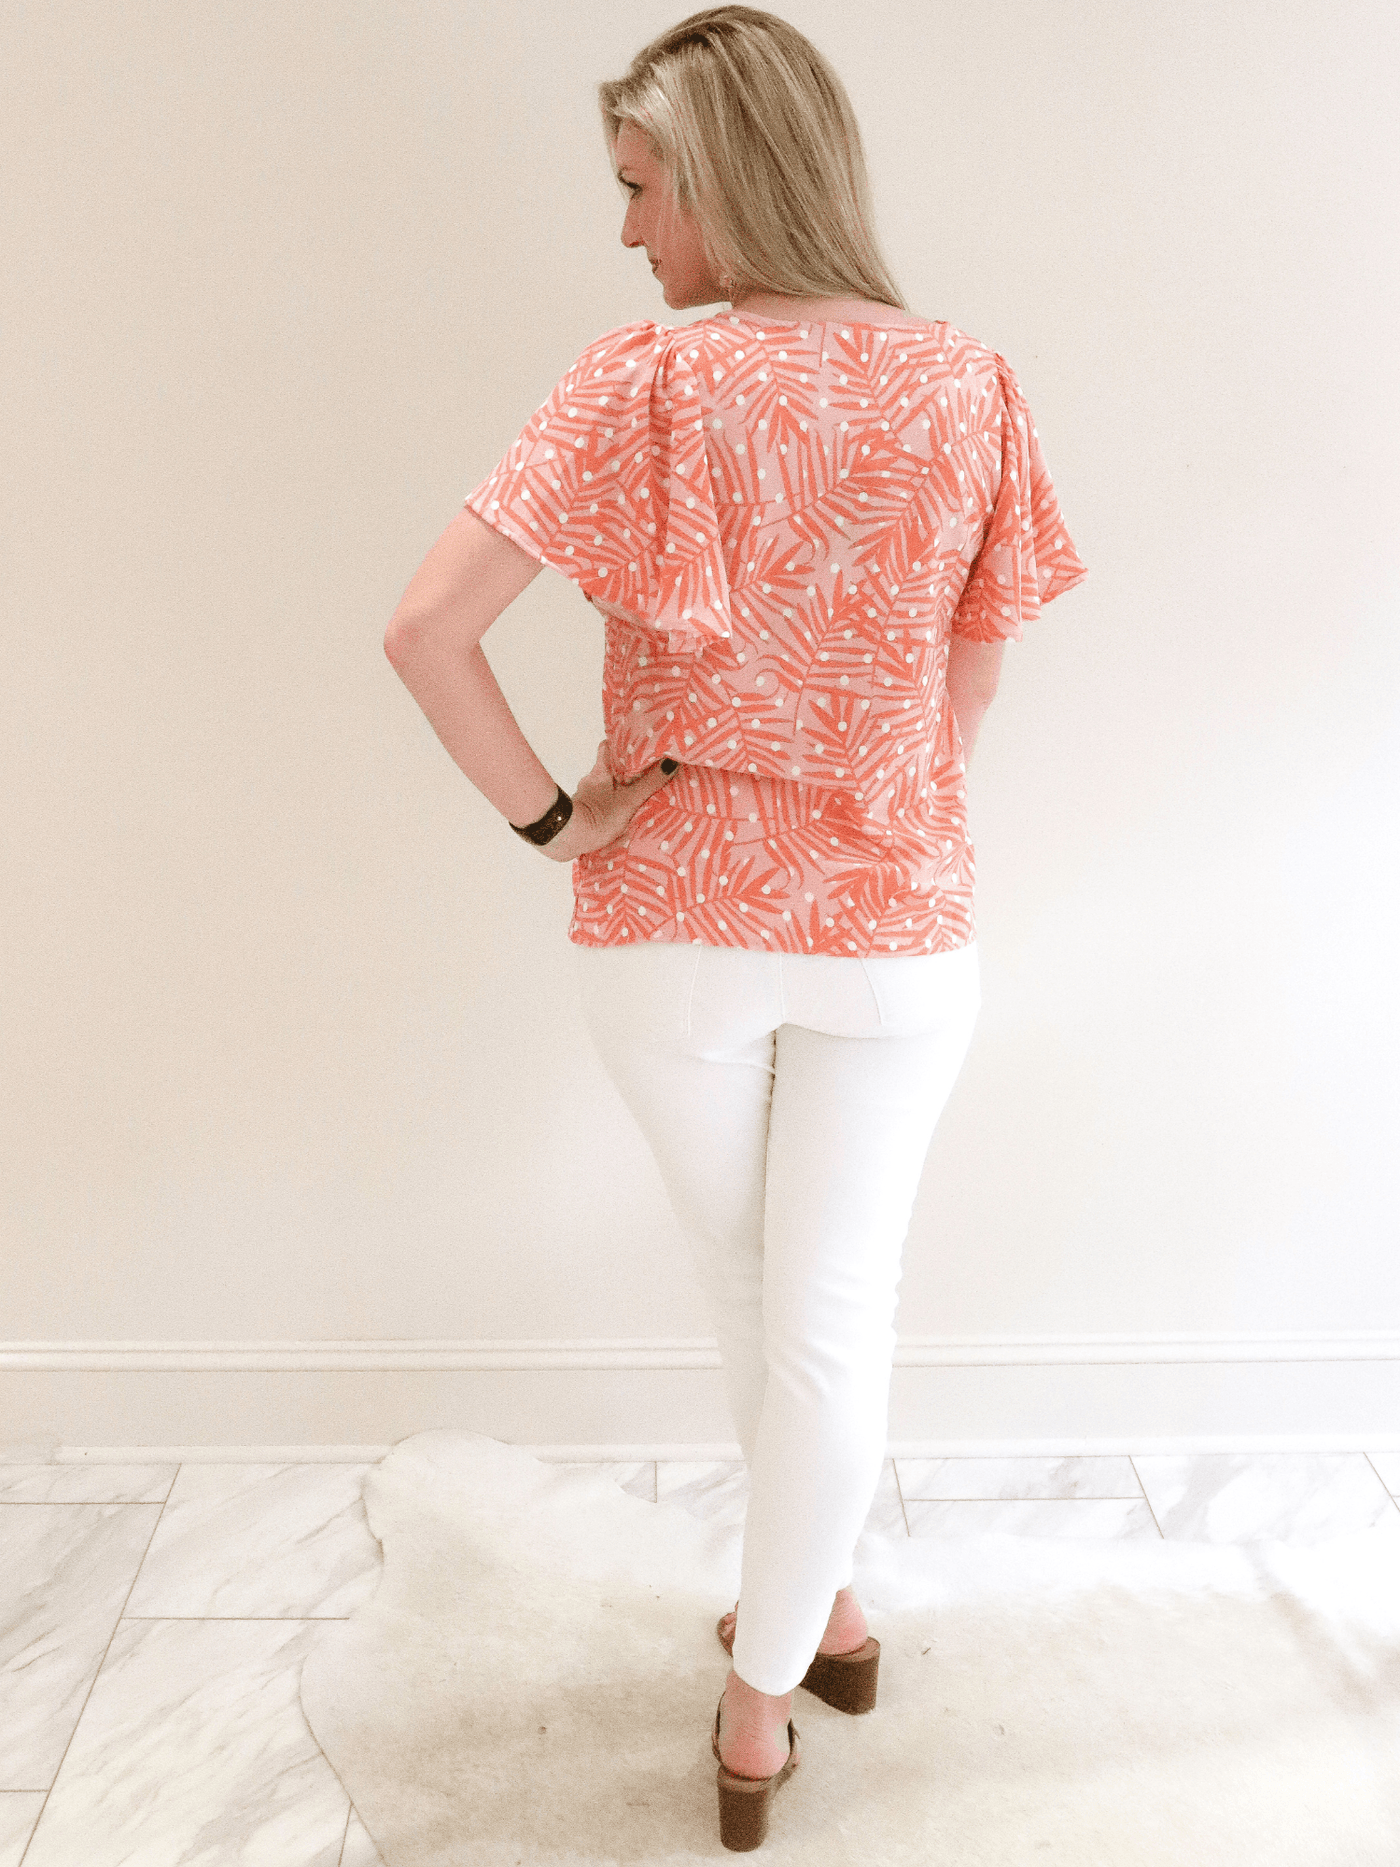 Michelle McDowell Pretty Palm Pink Paisley Top back view.